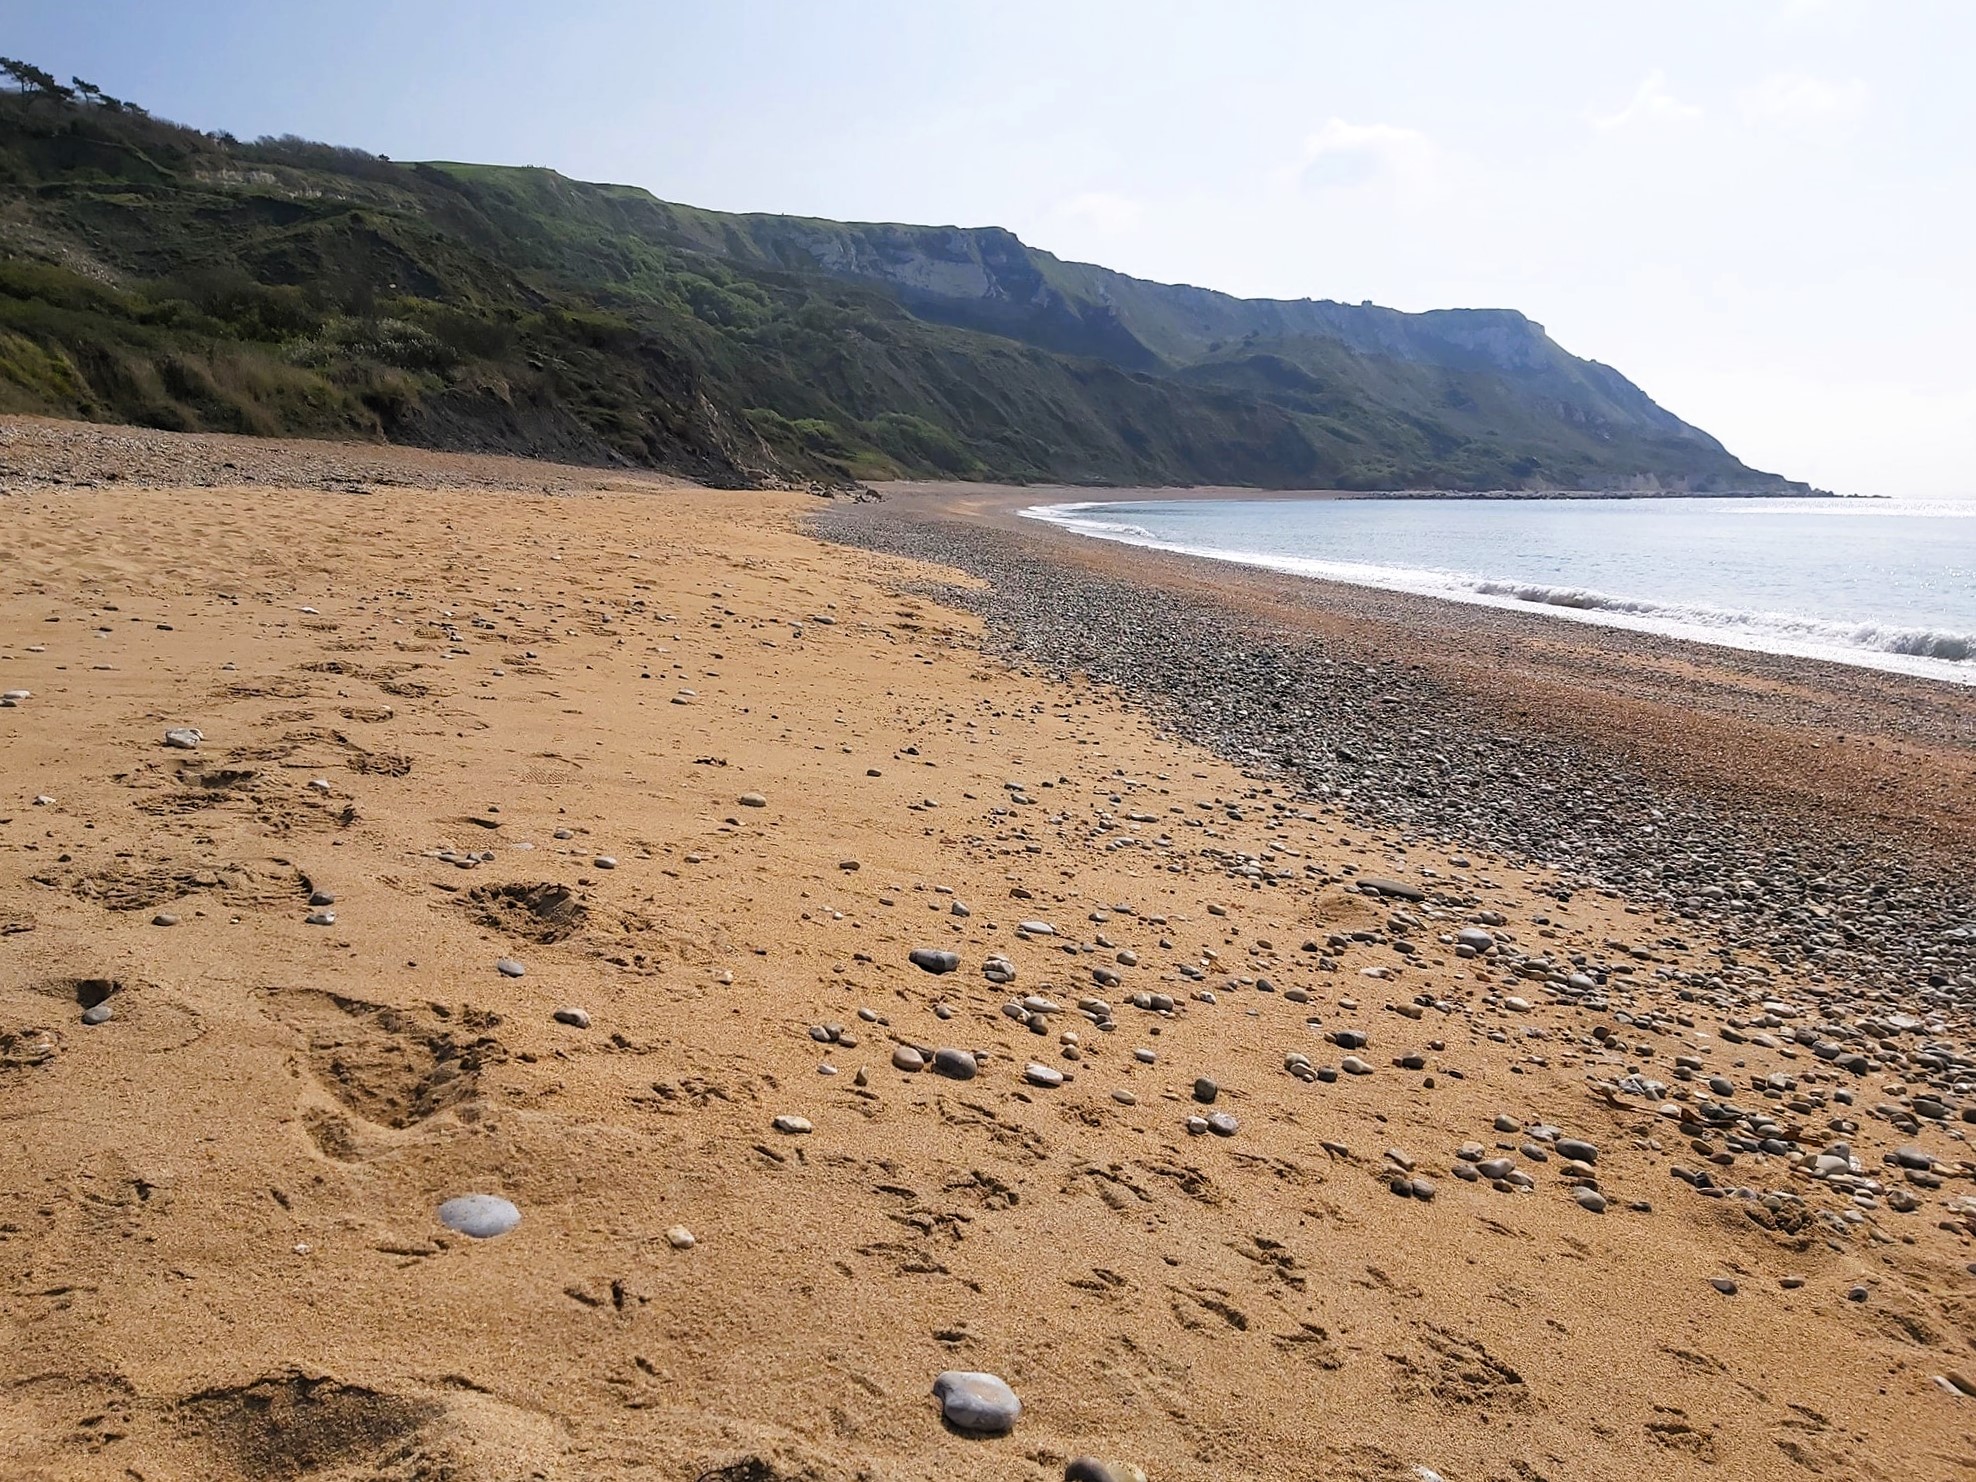 Ringstead beach and its cliffs, Dorset, England